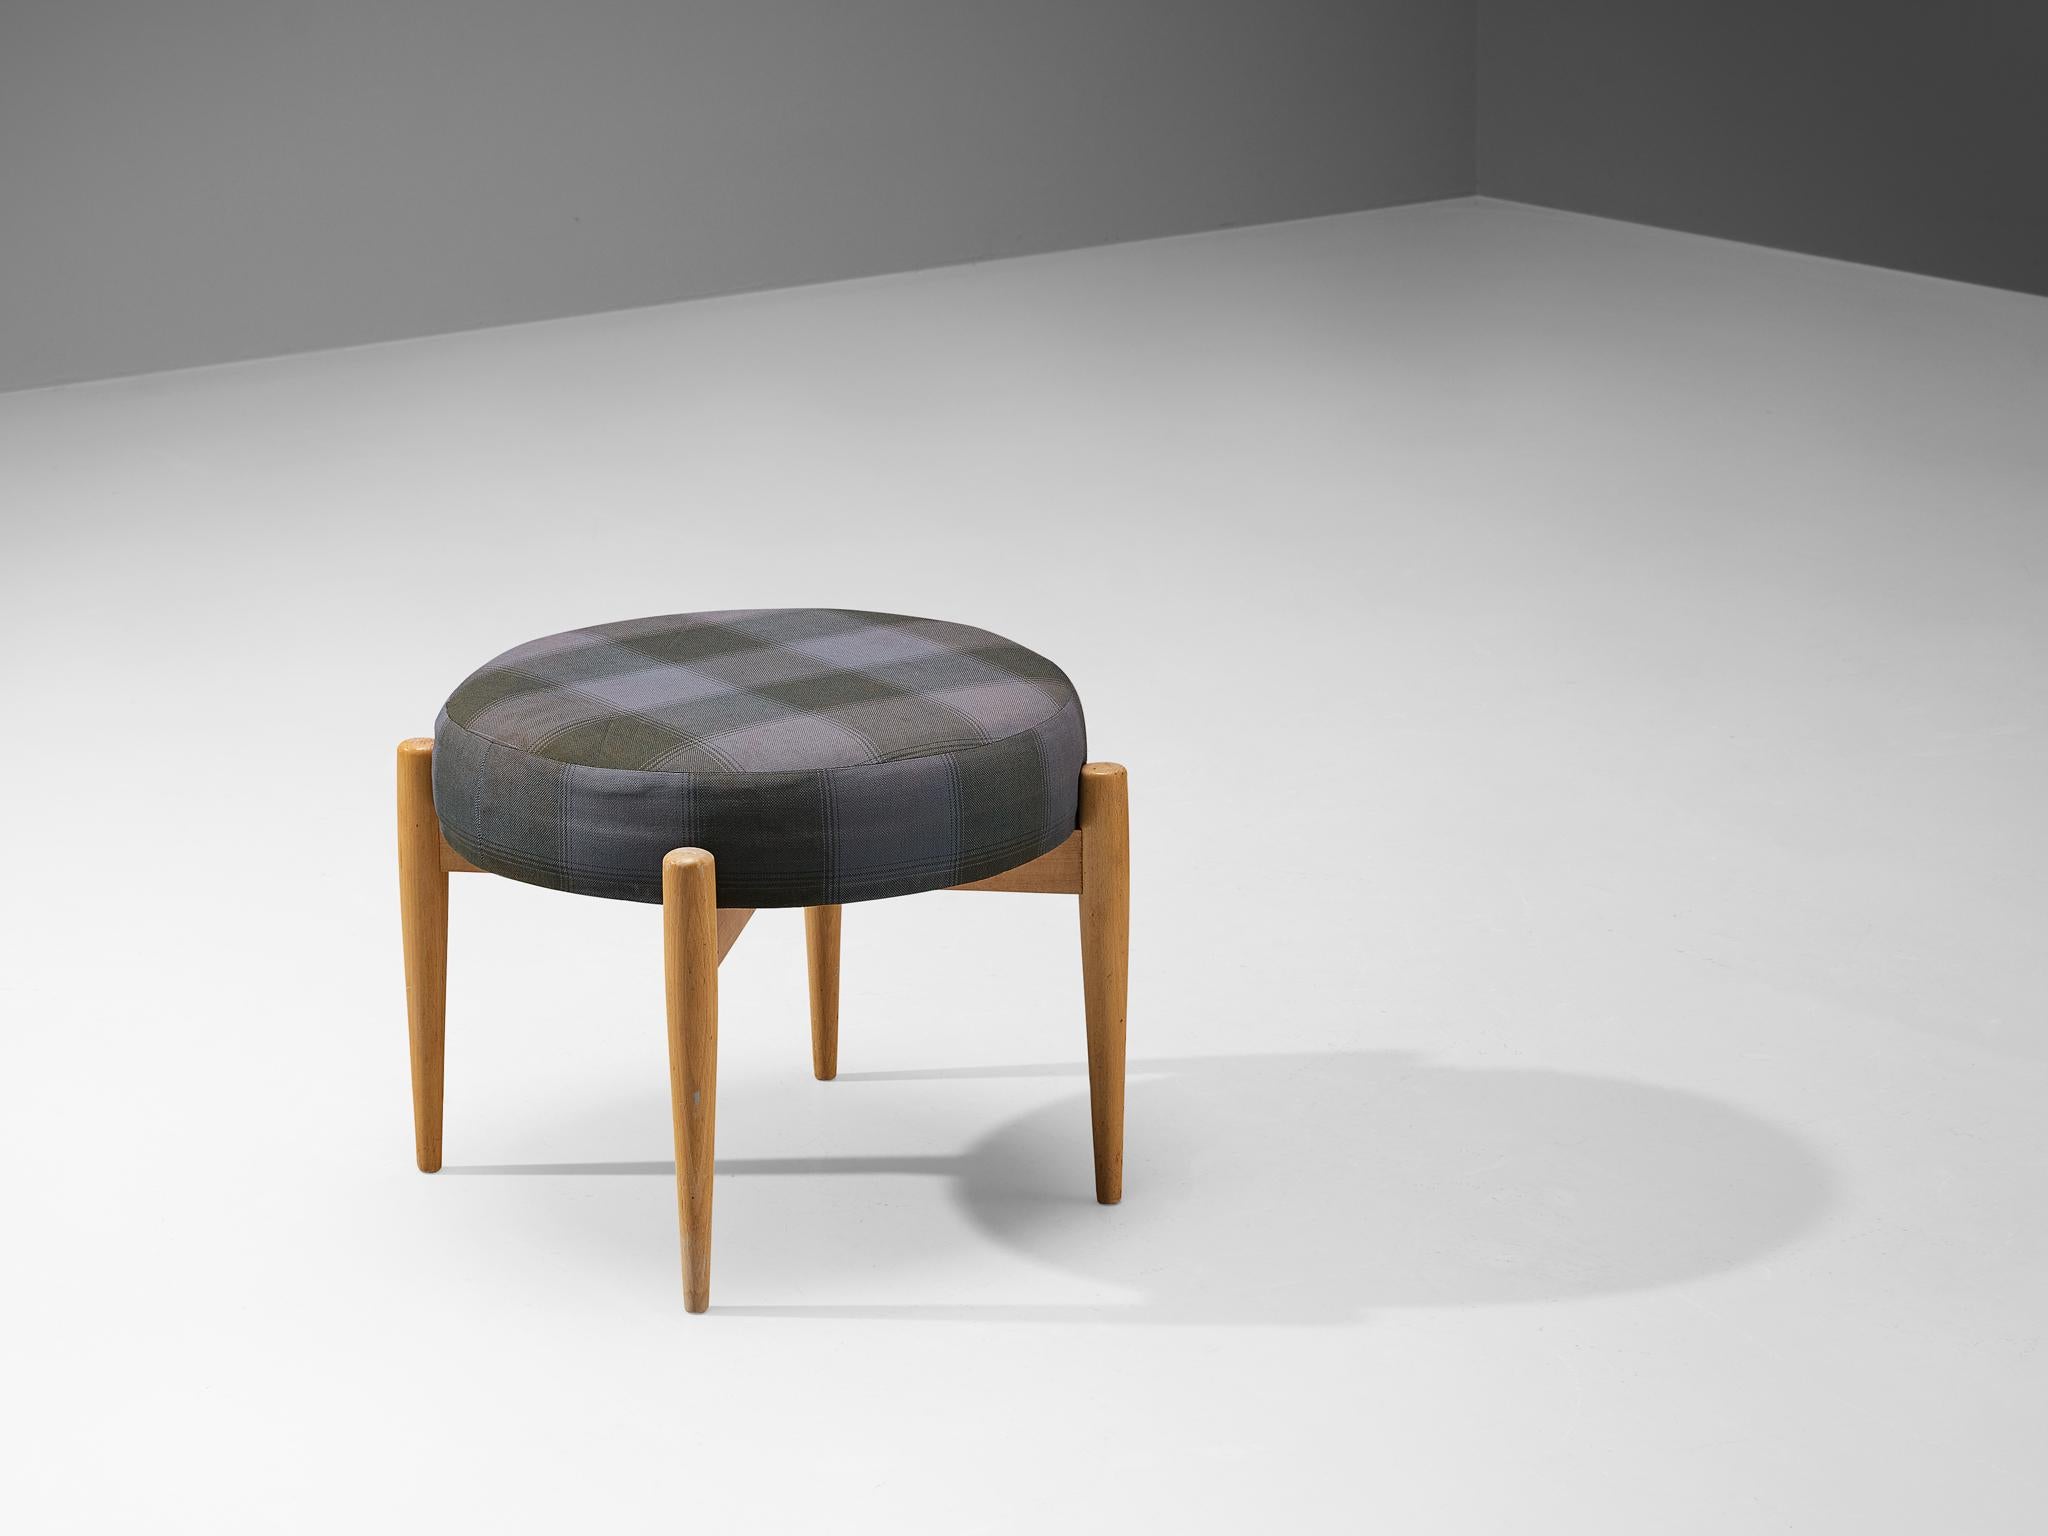 Stool or ottoman, beech, fabric, Denmark, 1960s

A Danish low stool with a round seat upholstered in a checkered fabric in black and grey hues. The base is composed of four round legs connected to a cross-shaped design. This well-proportioned piece